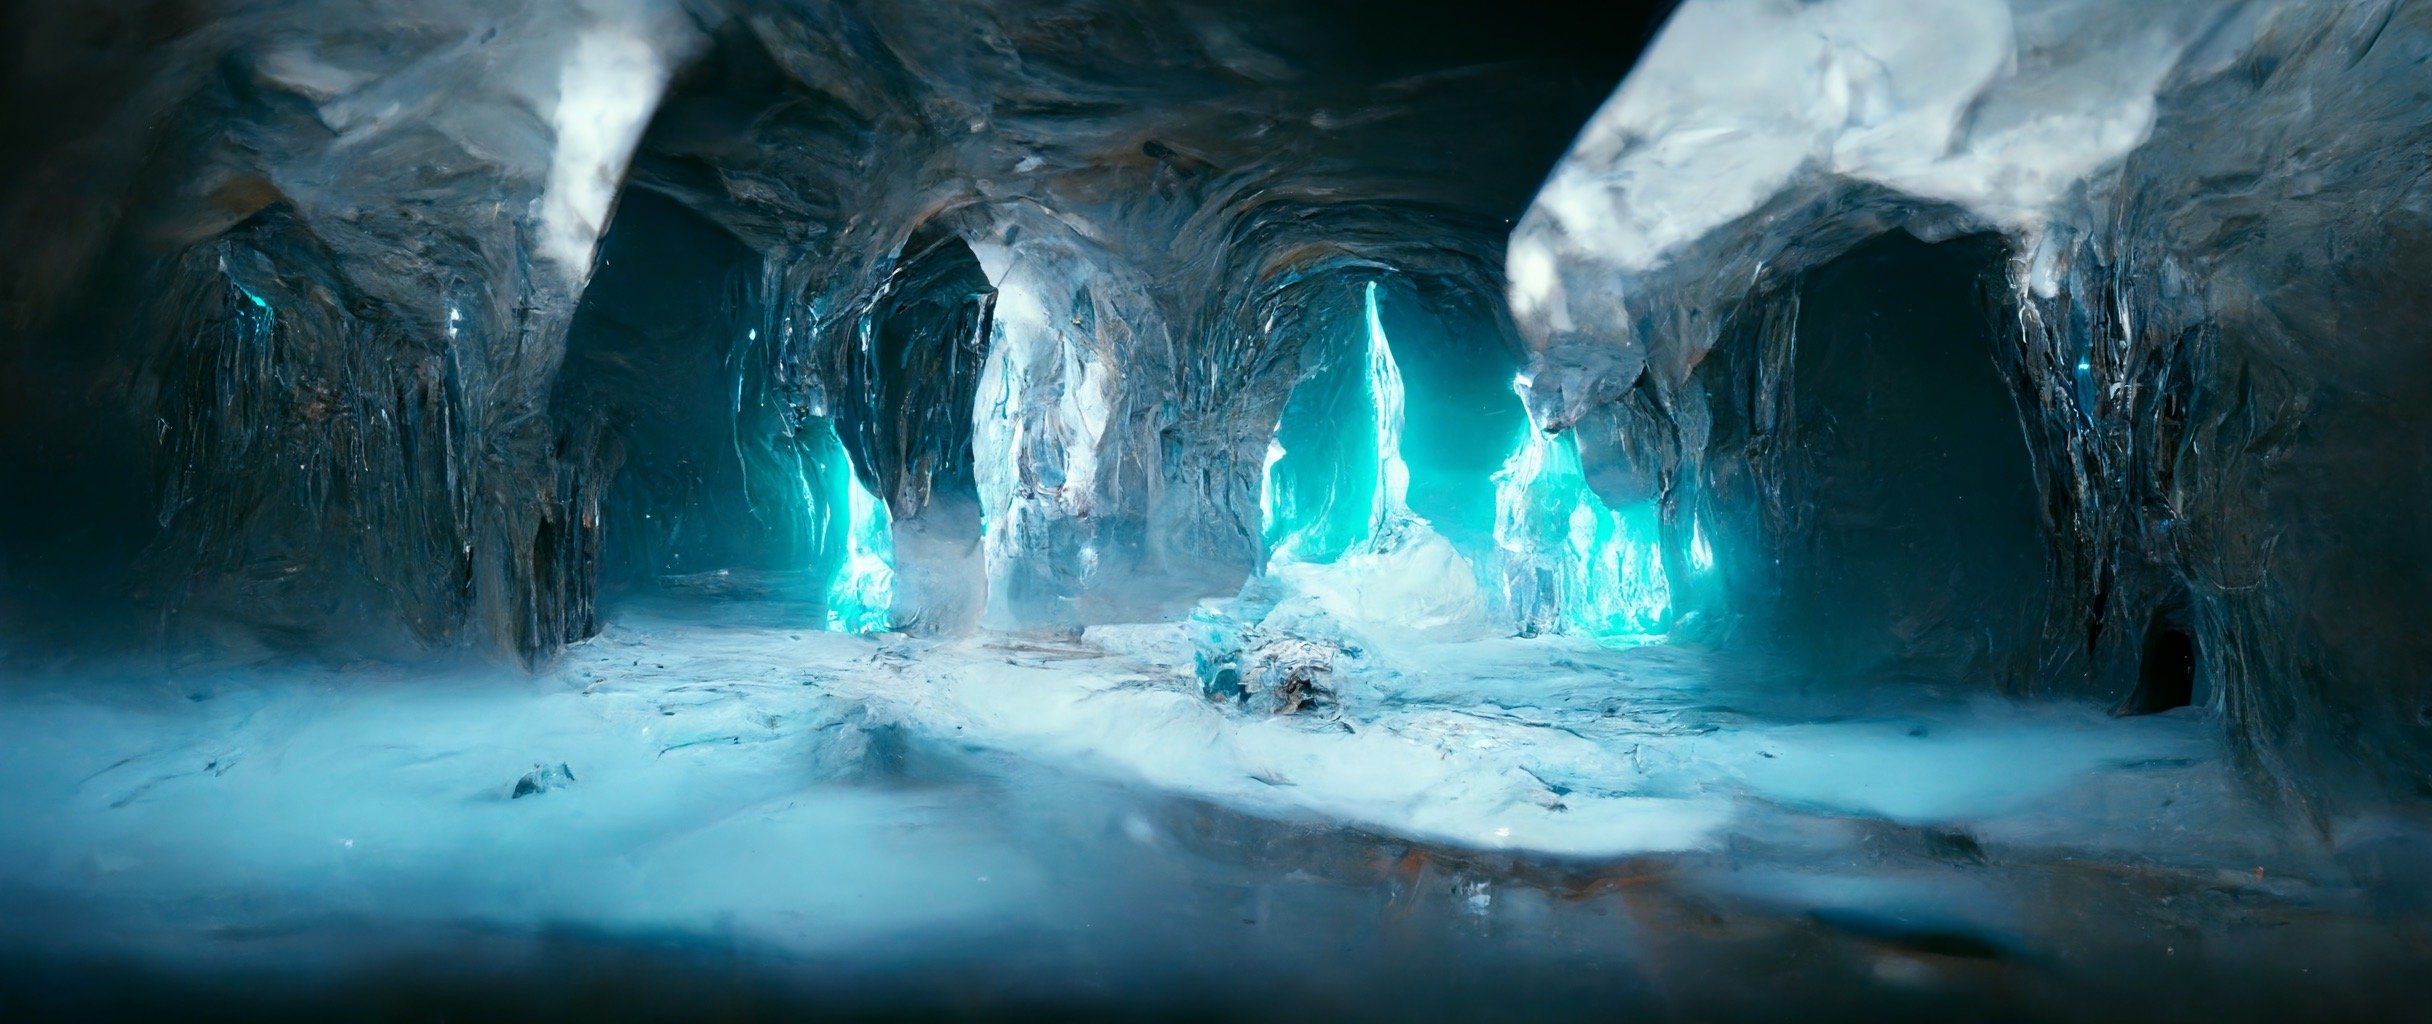 d7d33f0f-35bd-411b-a4c0-17b084e71d03_S3RAPH_epic_video_game_style_boss_fight_in_mystical_detailed_ice_cave._motion_blur_attack._8k_cinematic_com.JPG